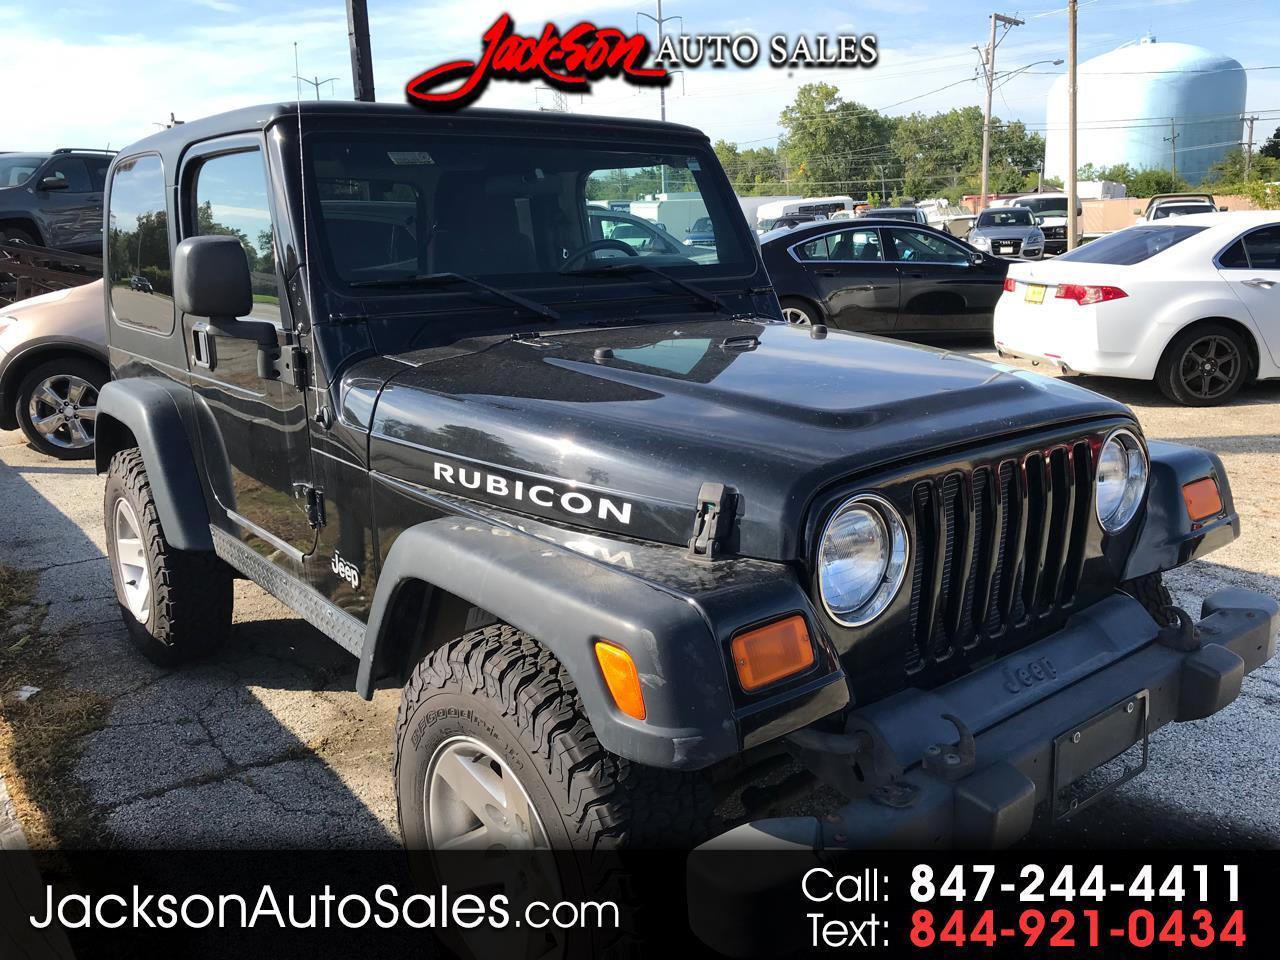 Used 2005 Jeep Wrangler 2dr Rubicon for Sale in Waukegan IL 60085 Jack-Son  Auto Sales